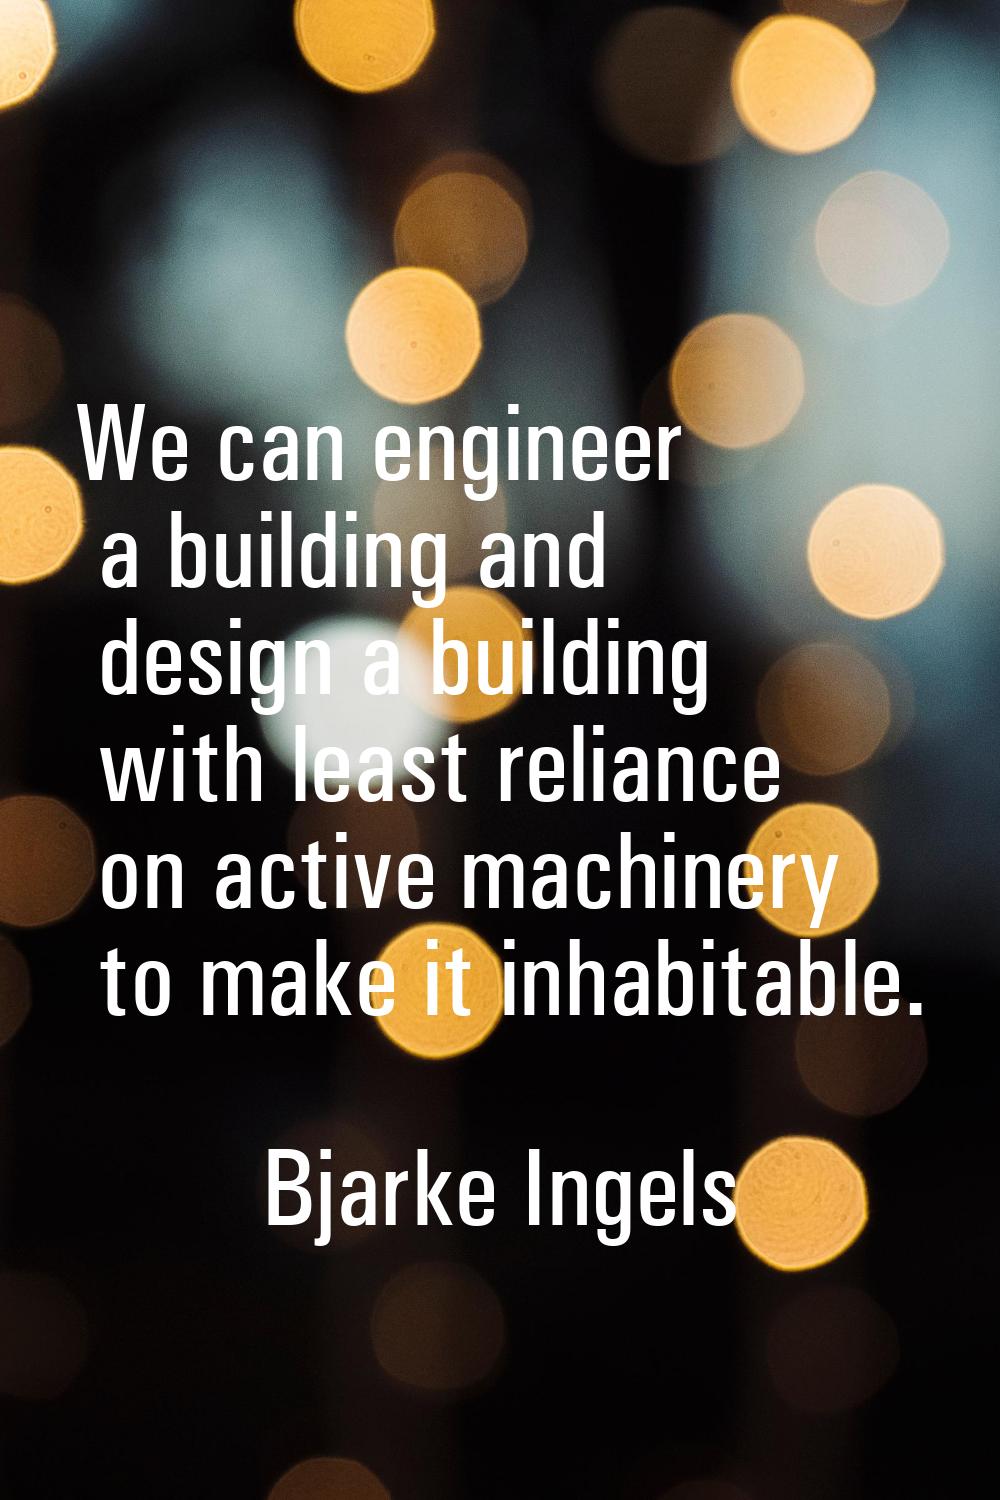 We can engineer a building and design a building with least reliance on active machinery to make it